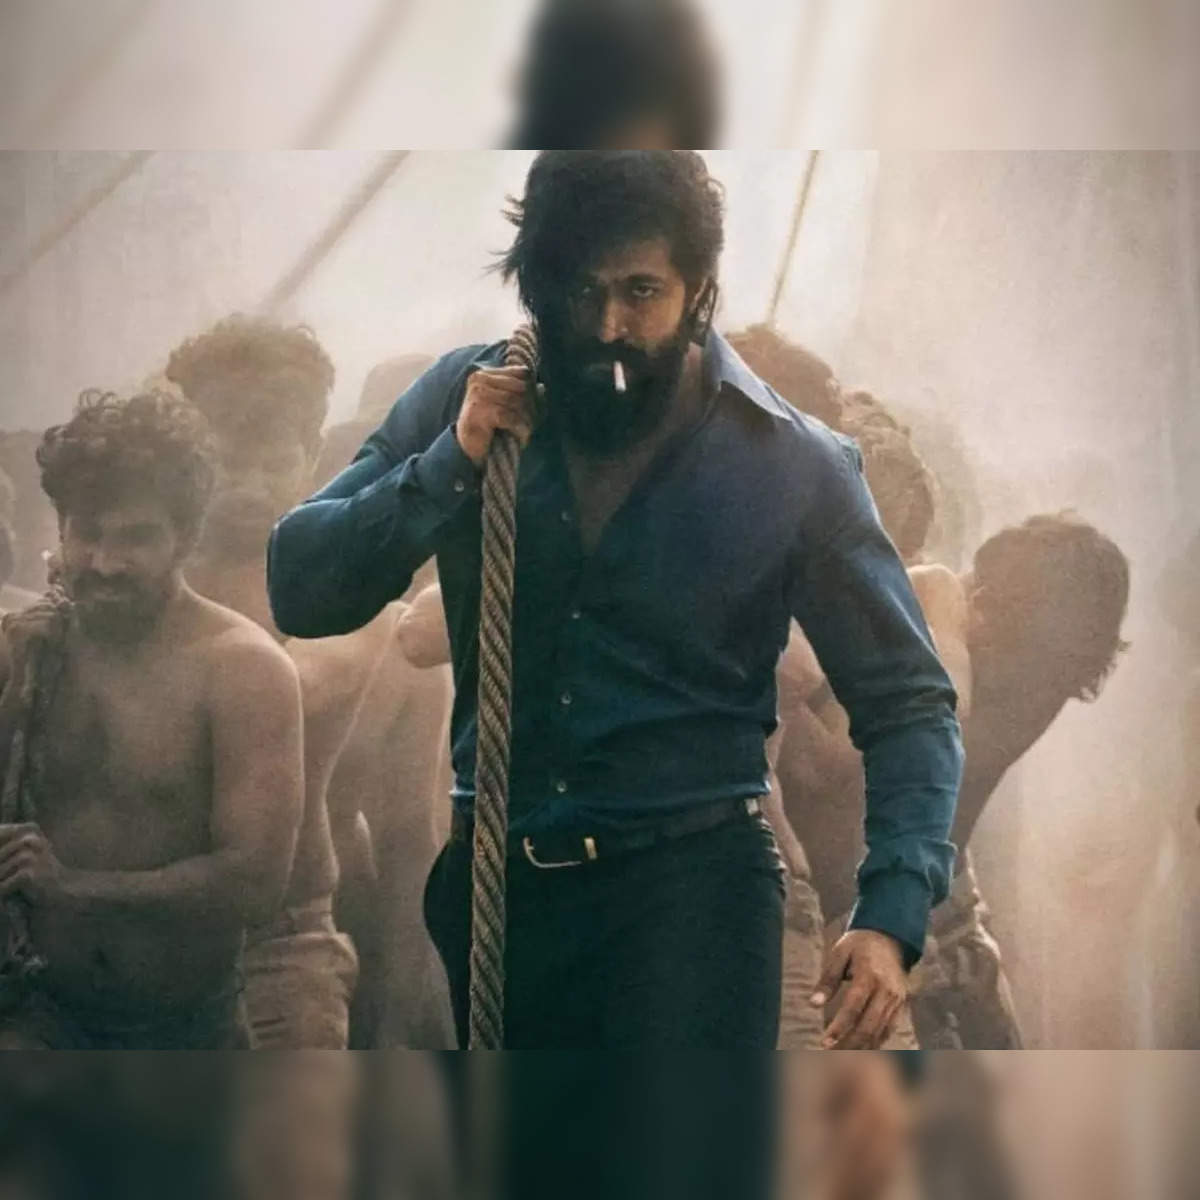 KGF RCB Version: Why is Yash's movie being linked to Royal